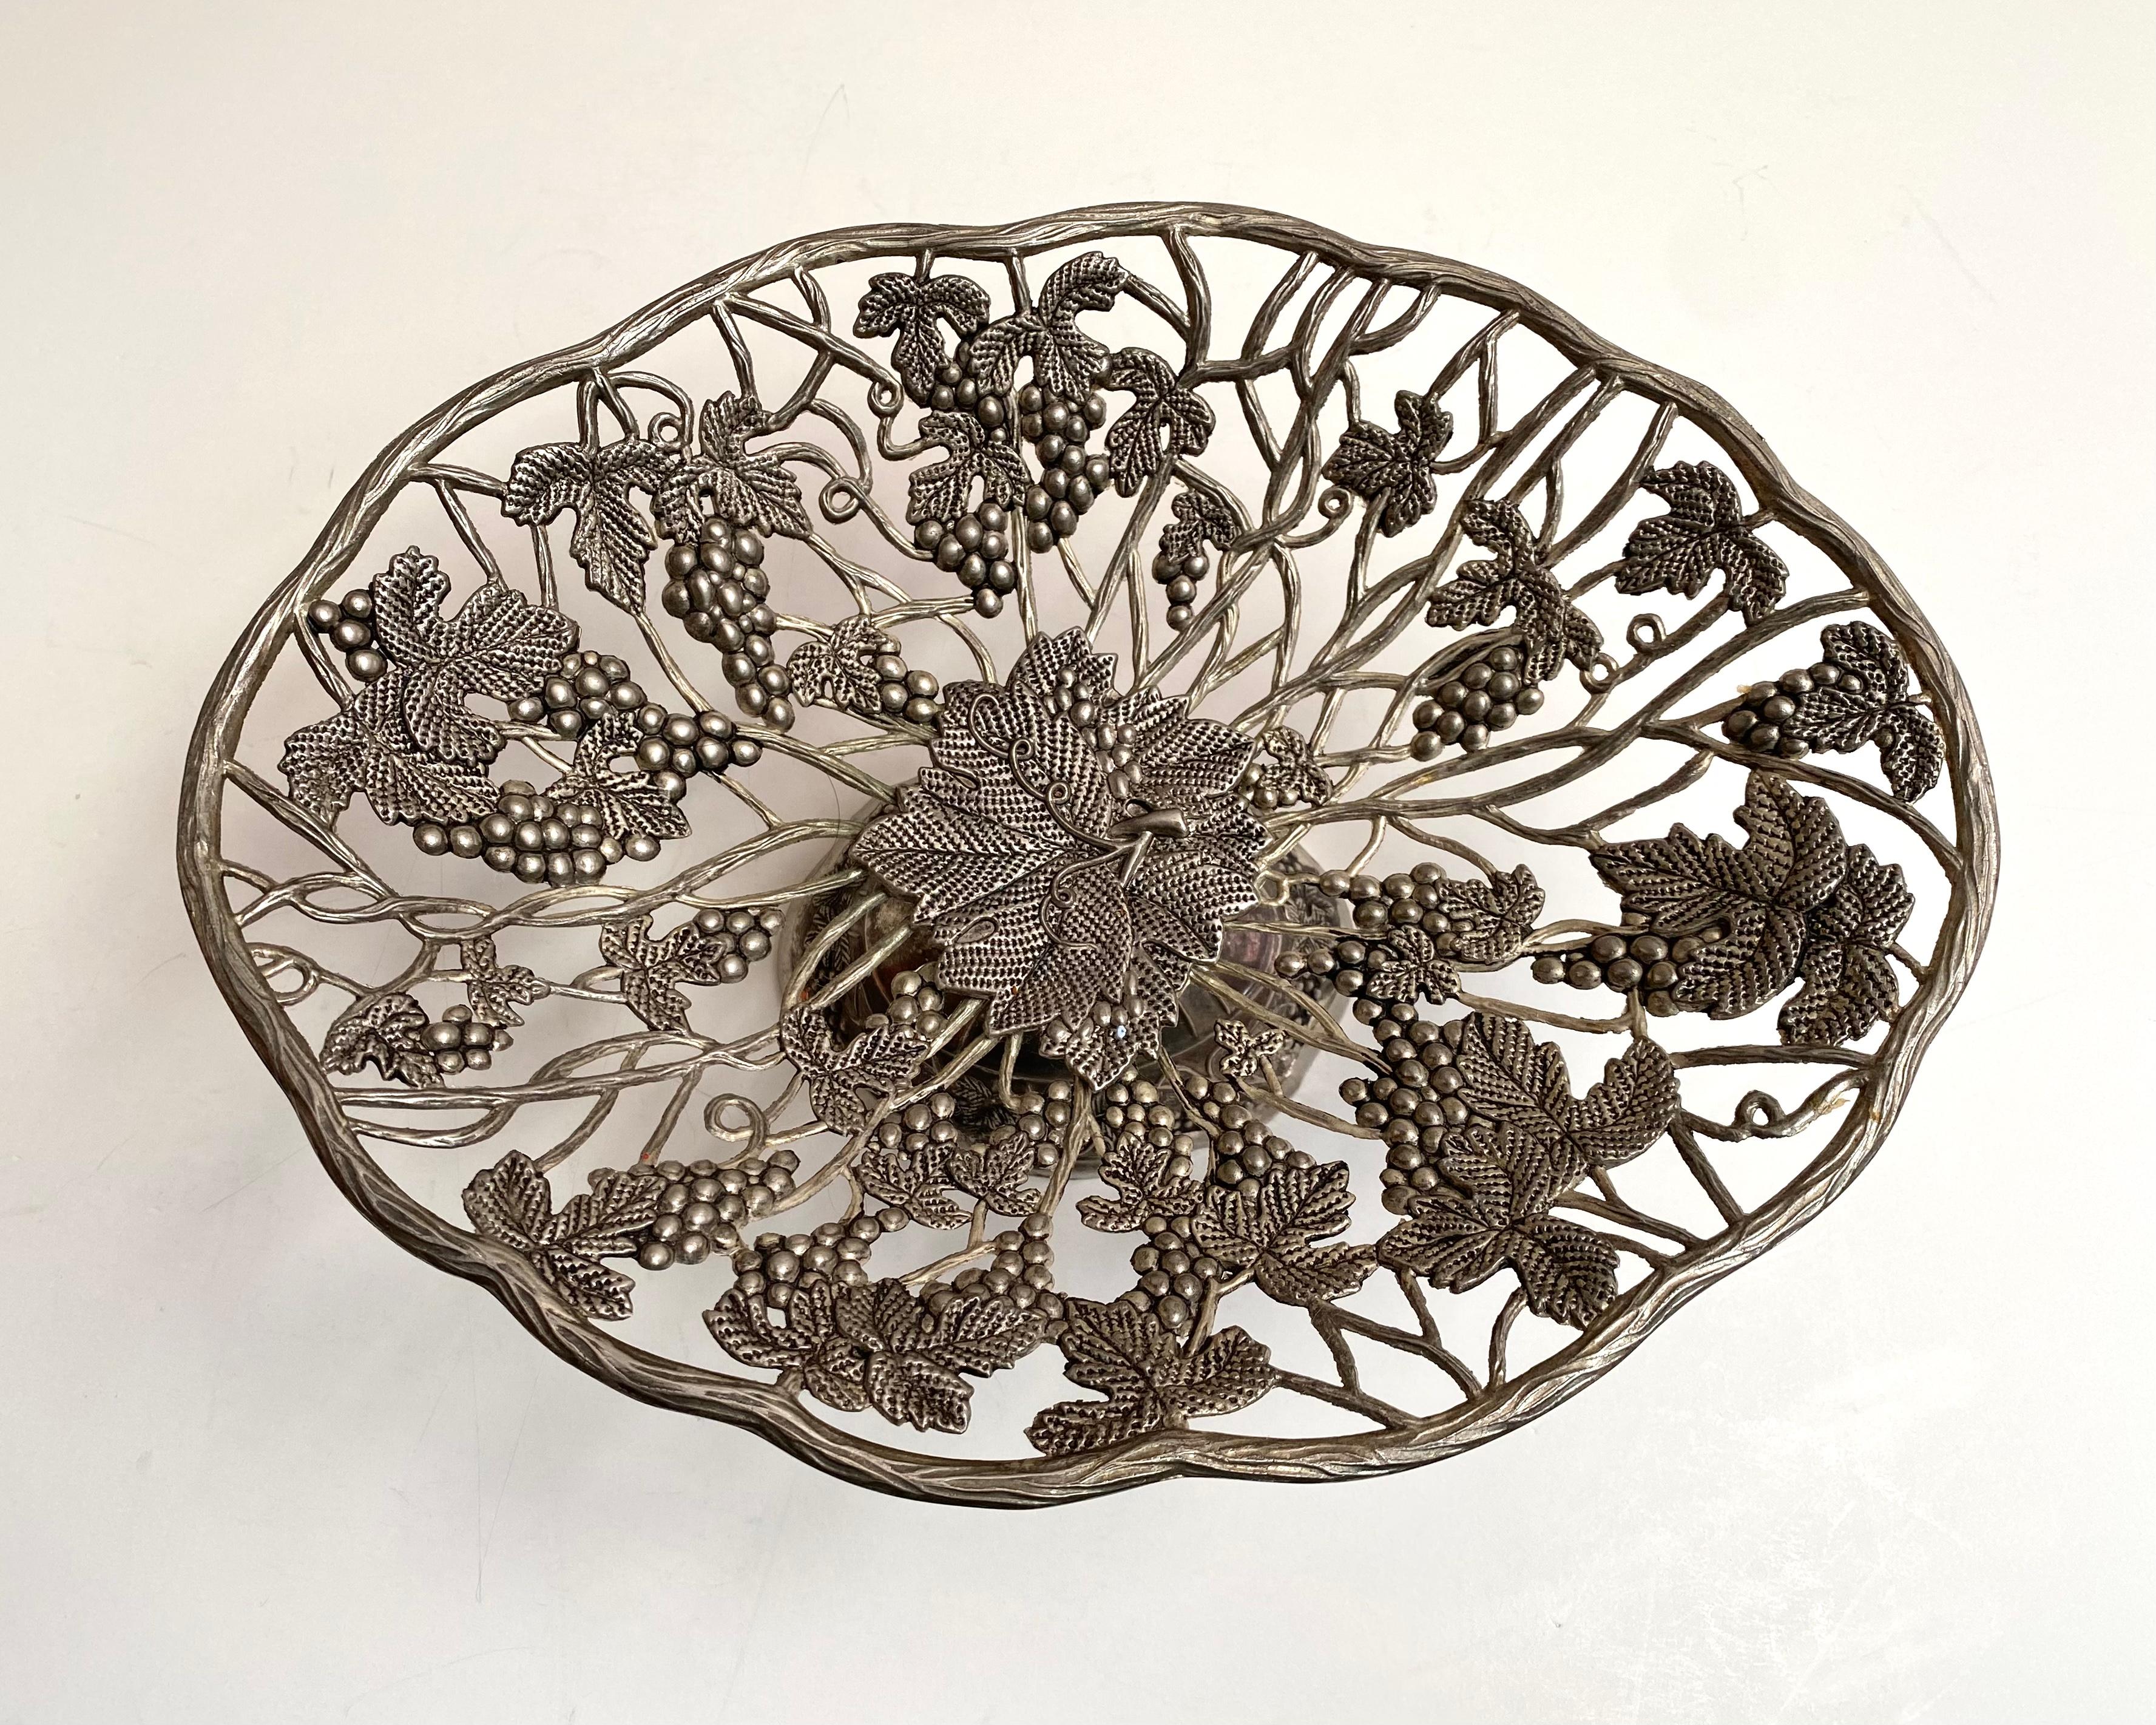 Vintage silver plated footed centrepiece in Art Nouveau style, France, 1960s.

Beautifully detailed in Art Nouveau pattern with grape & vines all around.

An elegant epergne for serving dessert. It can be not only fruit platter, but also